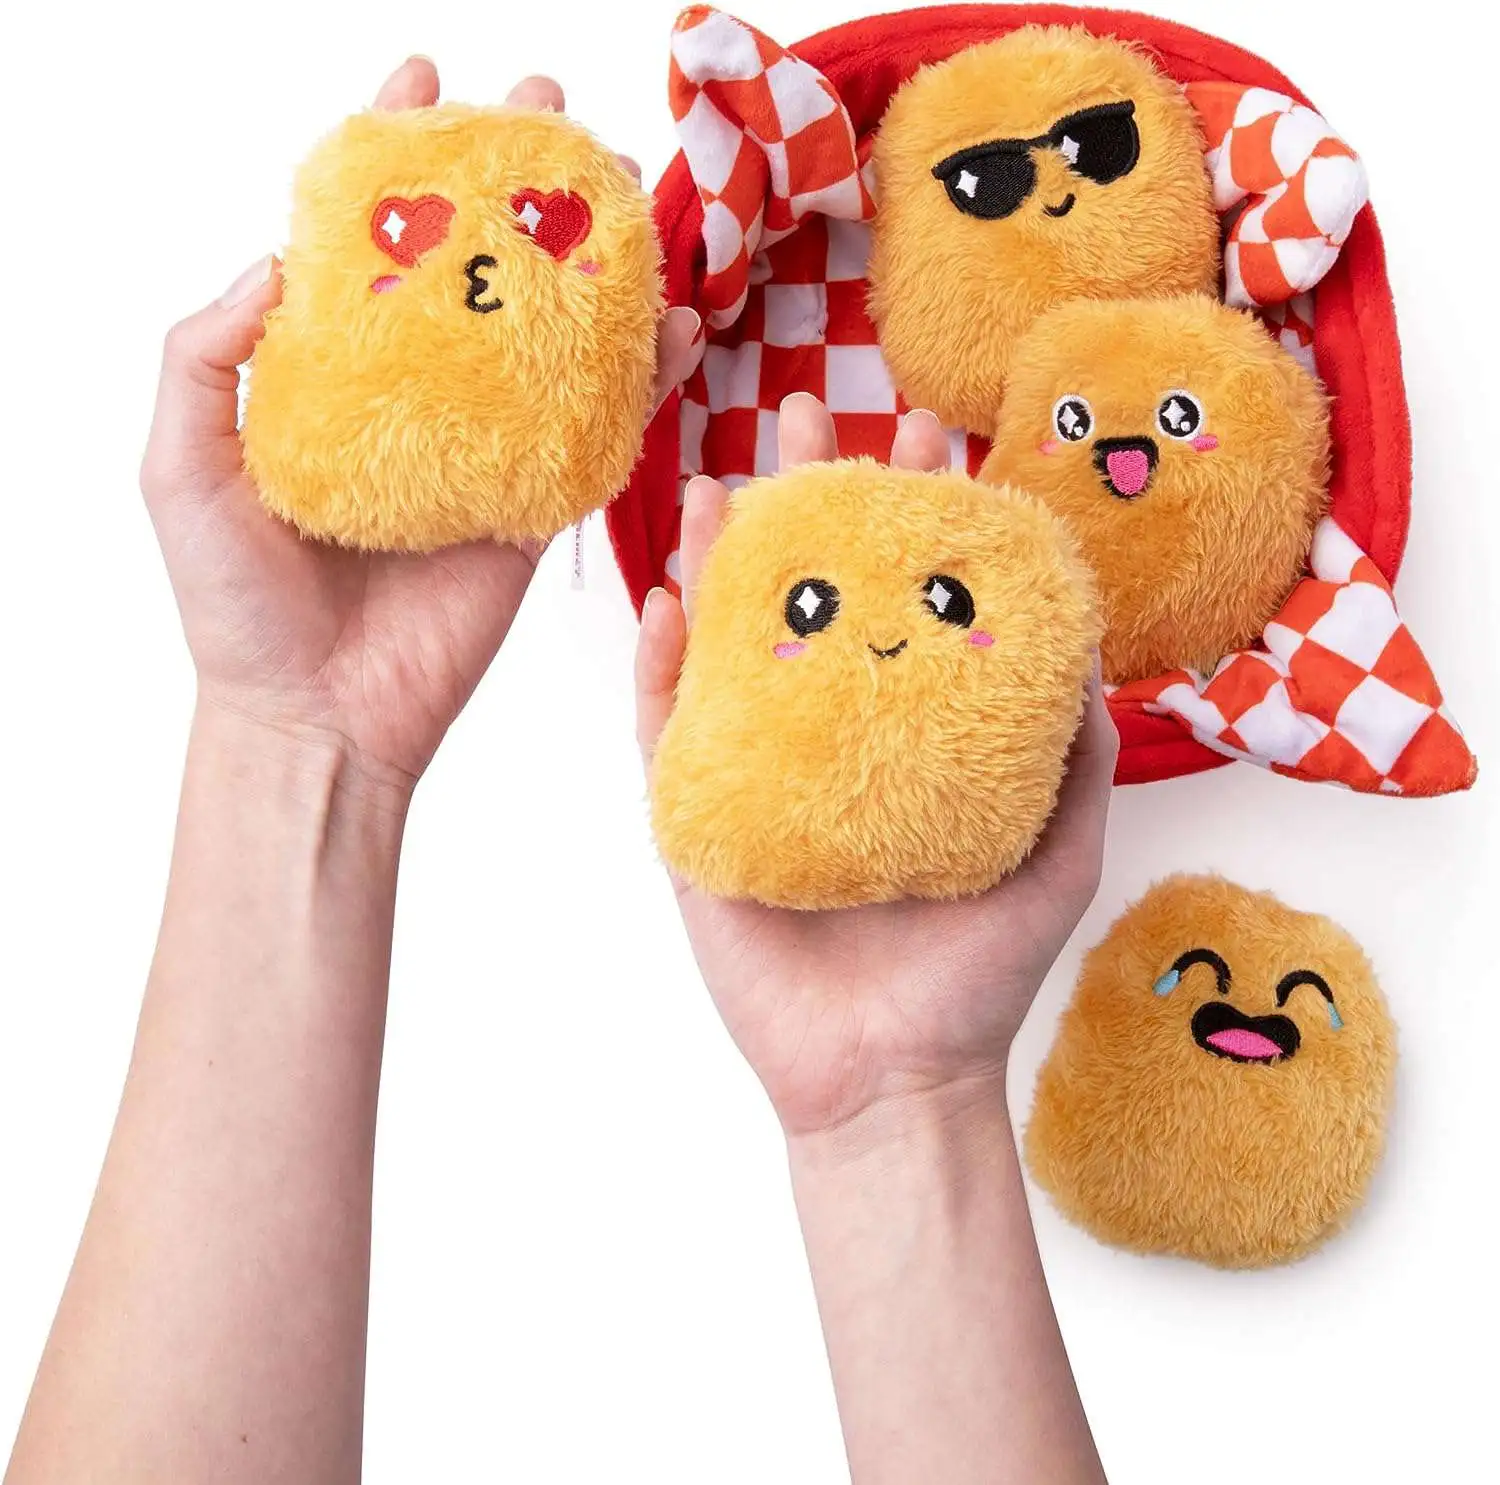 What Do You Meme Emotional Support Chickies - Unique Gifts for Valentine's  Day, Cute Chicken Plushies